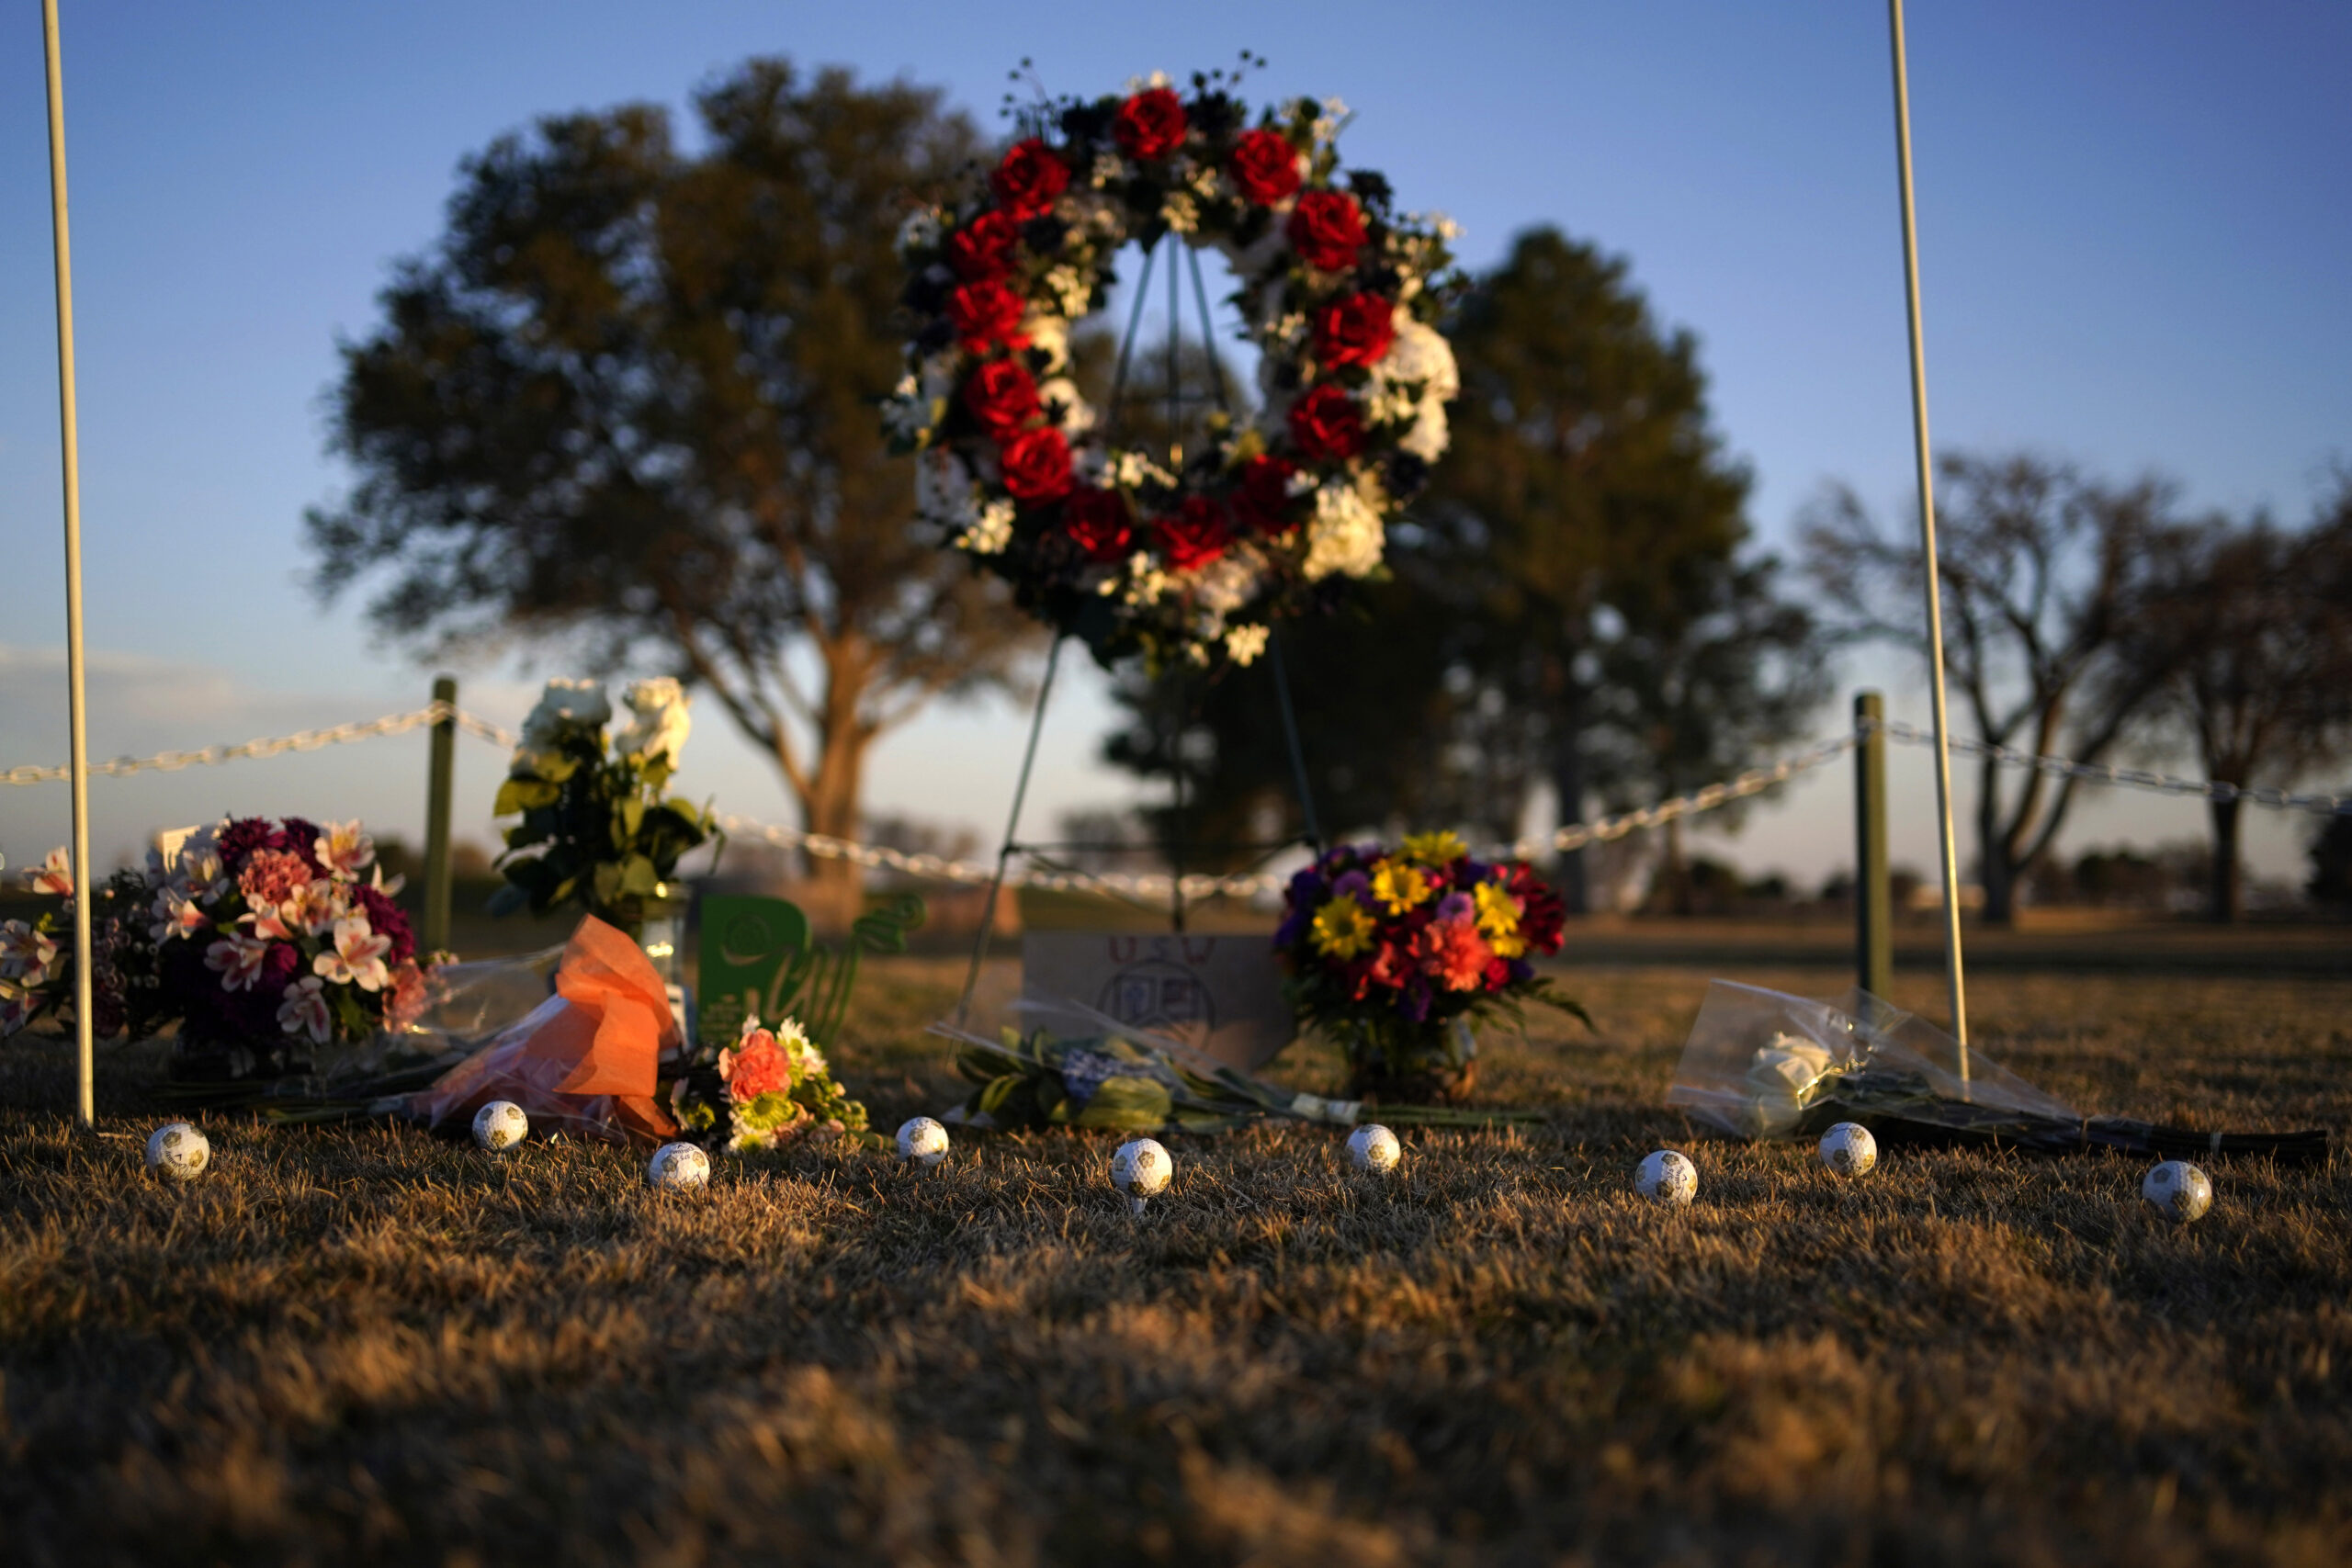 Golf balls adorn a makeshift memorial at the Rockwind Community Links, Wednesday, March 16, 2022, in Hobbs, New Mexico. The memorial was for student golfers and the coach of University of the Southwest killed in a crash in Texas. (AP Photo/John Locher)